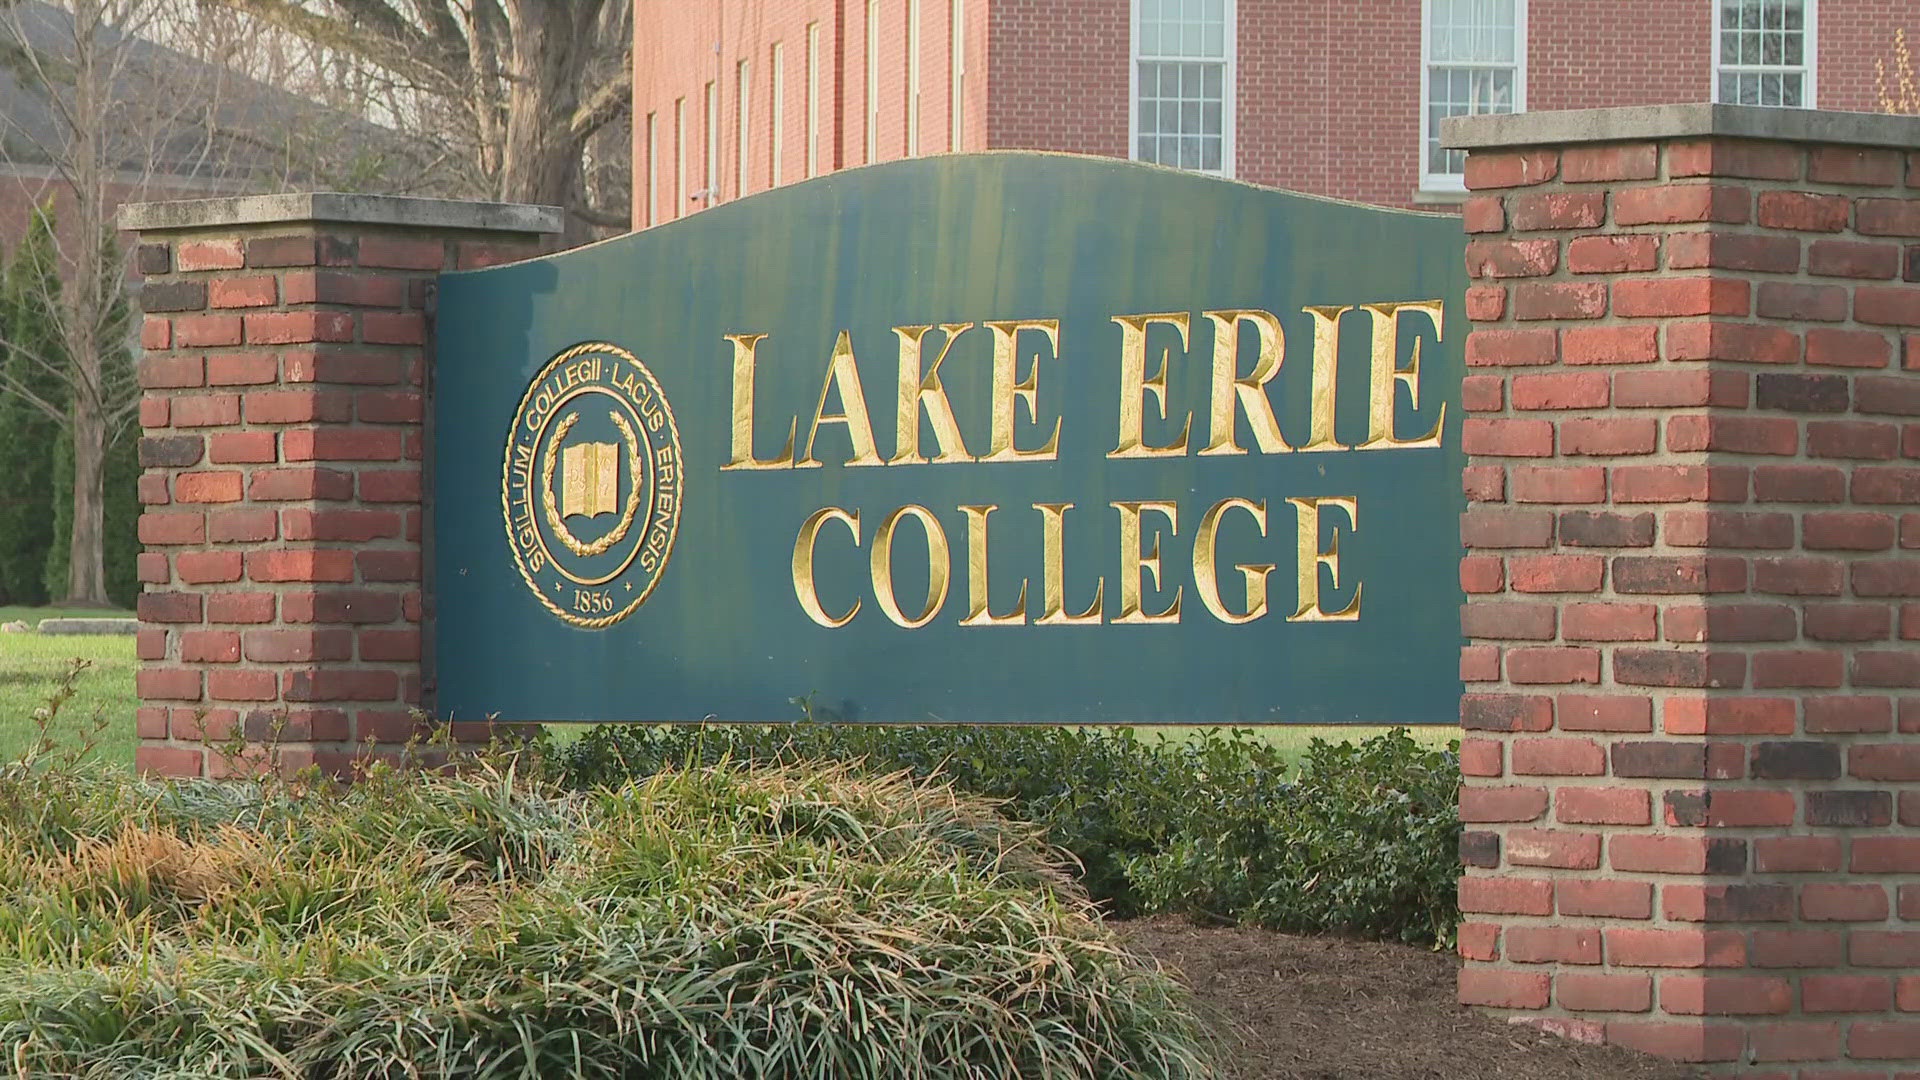 Lake Erie College will house NDC's 'organizational records,' including transcripts and alumni records. It will also be the home of NDC's Athletic Hall of Fame.